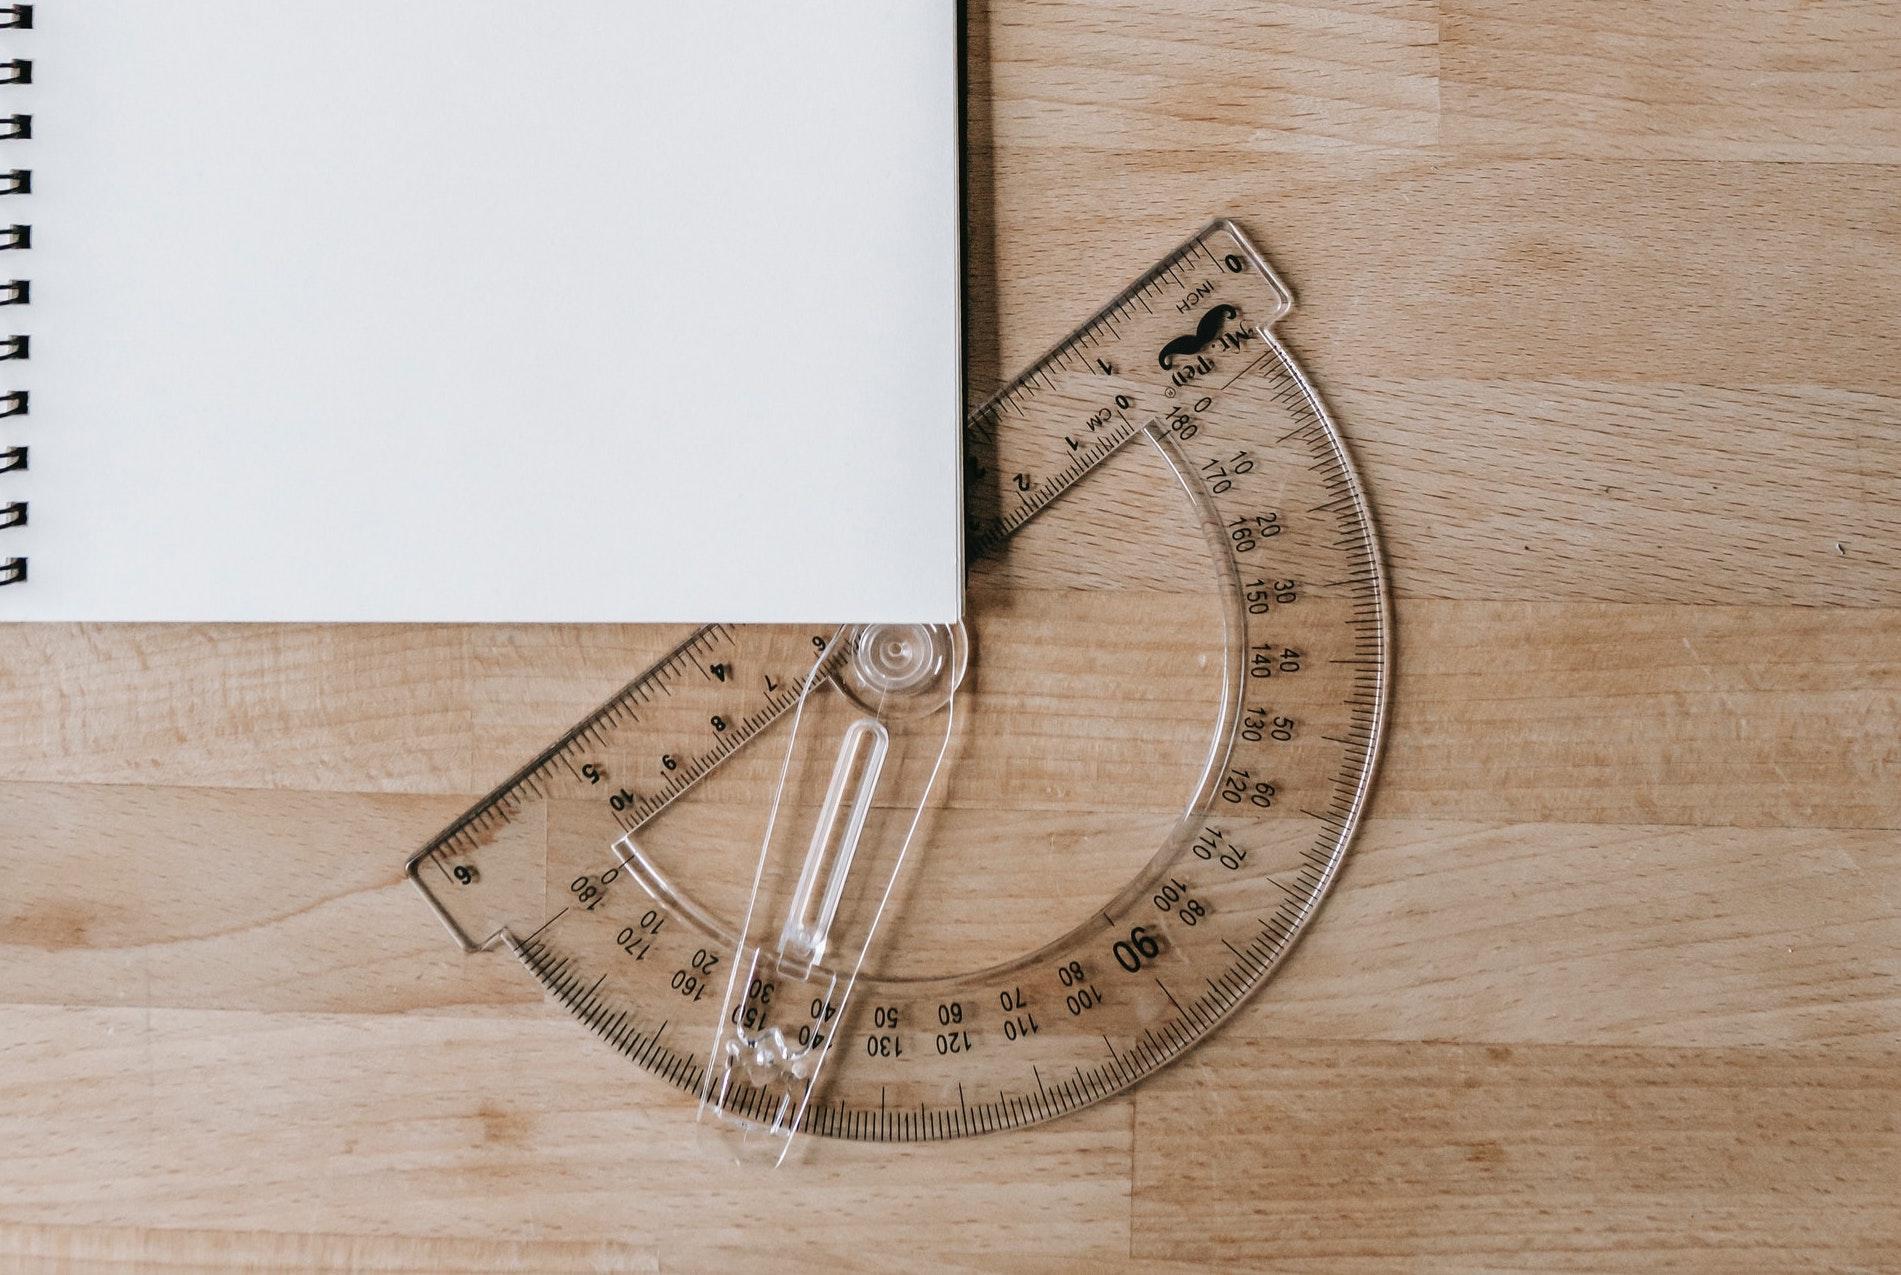 Pi represents the ratio of a circle's circumference to its diameter, with an infinite number of digits following the decimal point. Photo: Pexels